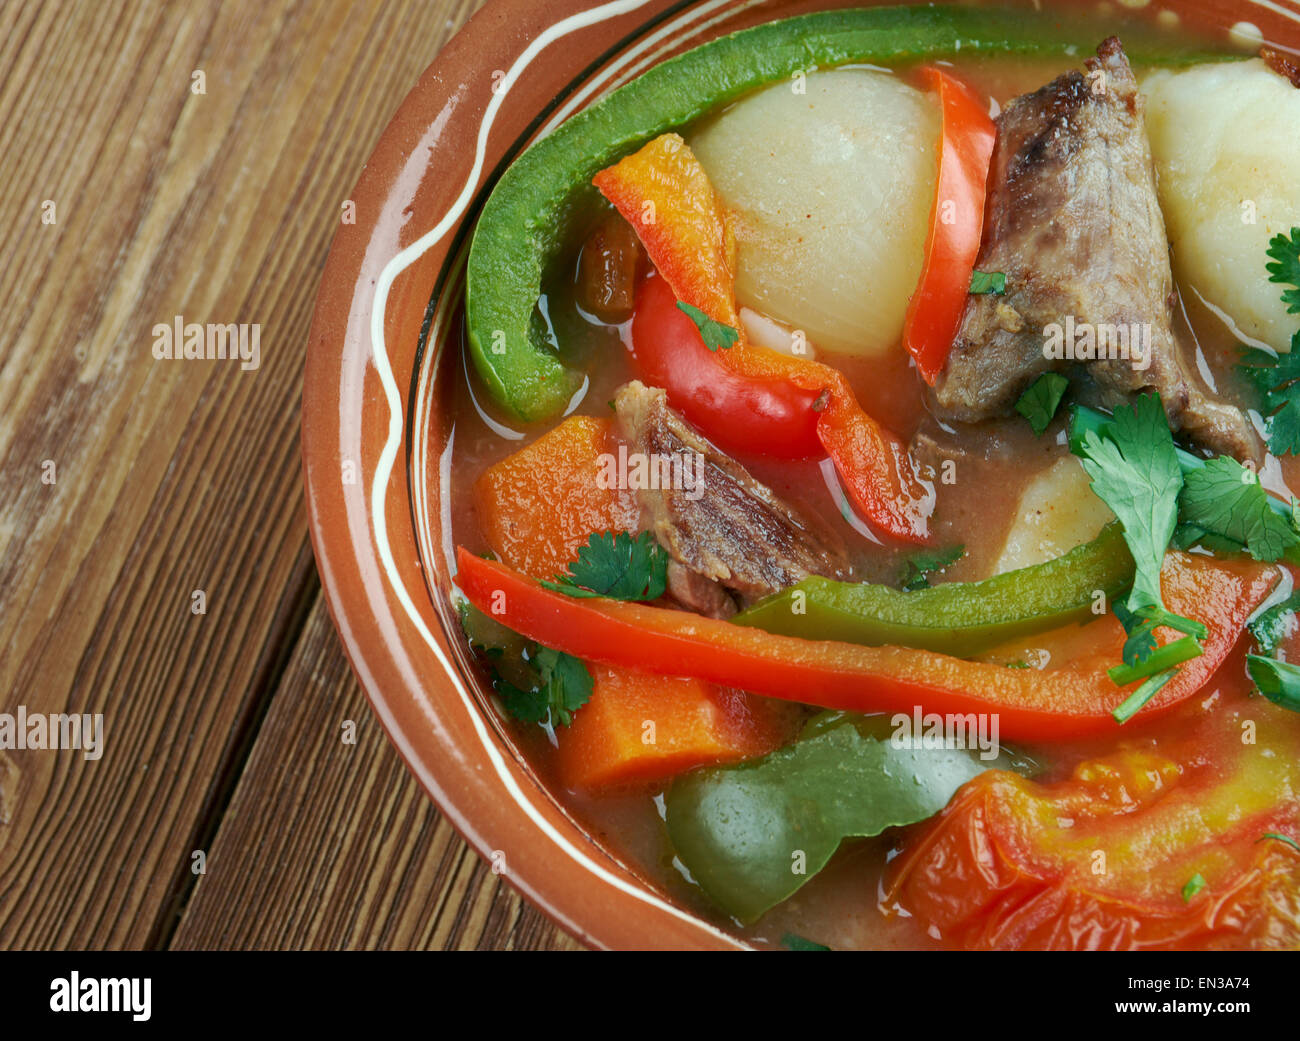 Philadelphia Pepper Pot - thick stew of beef tripe, vegetables, pepper and  other seasonings Stock Photo - Alamy